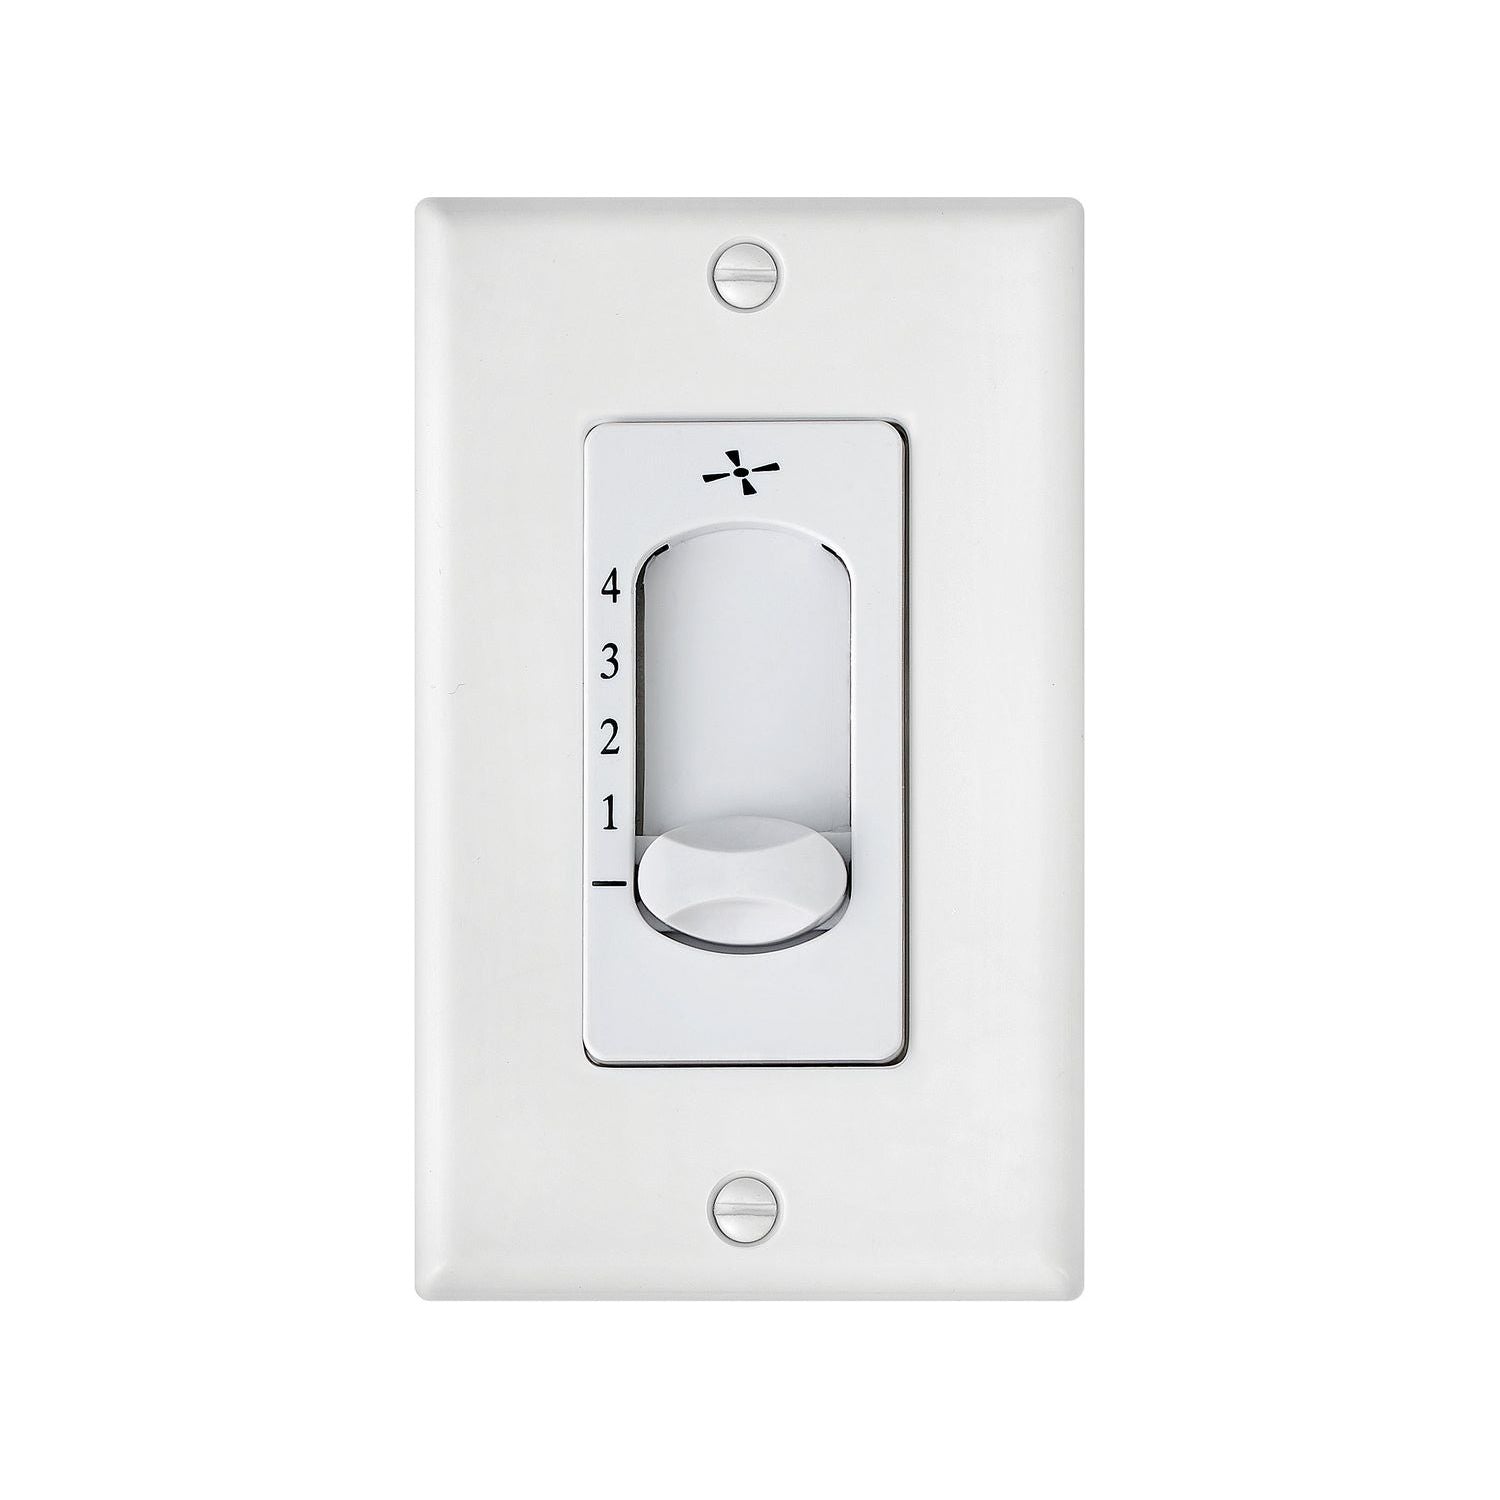 Hinkley Canada - 980011FWH - Wall Contol - Wall Control 4 Speed Slide - White